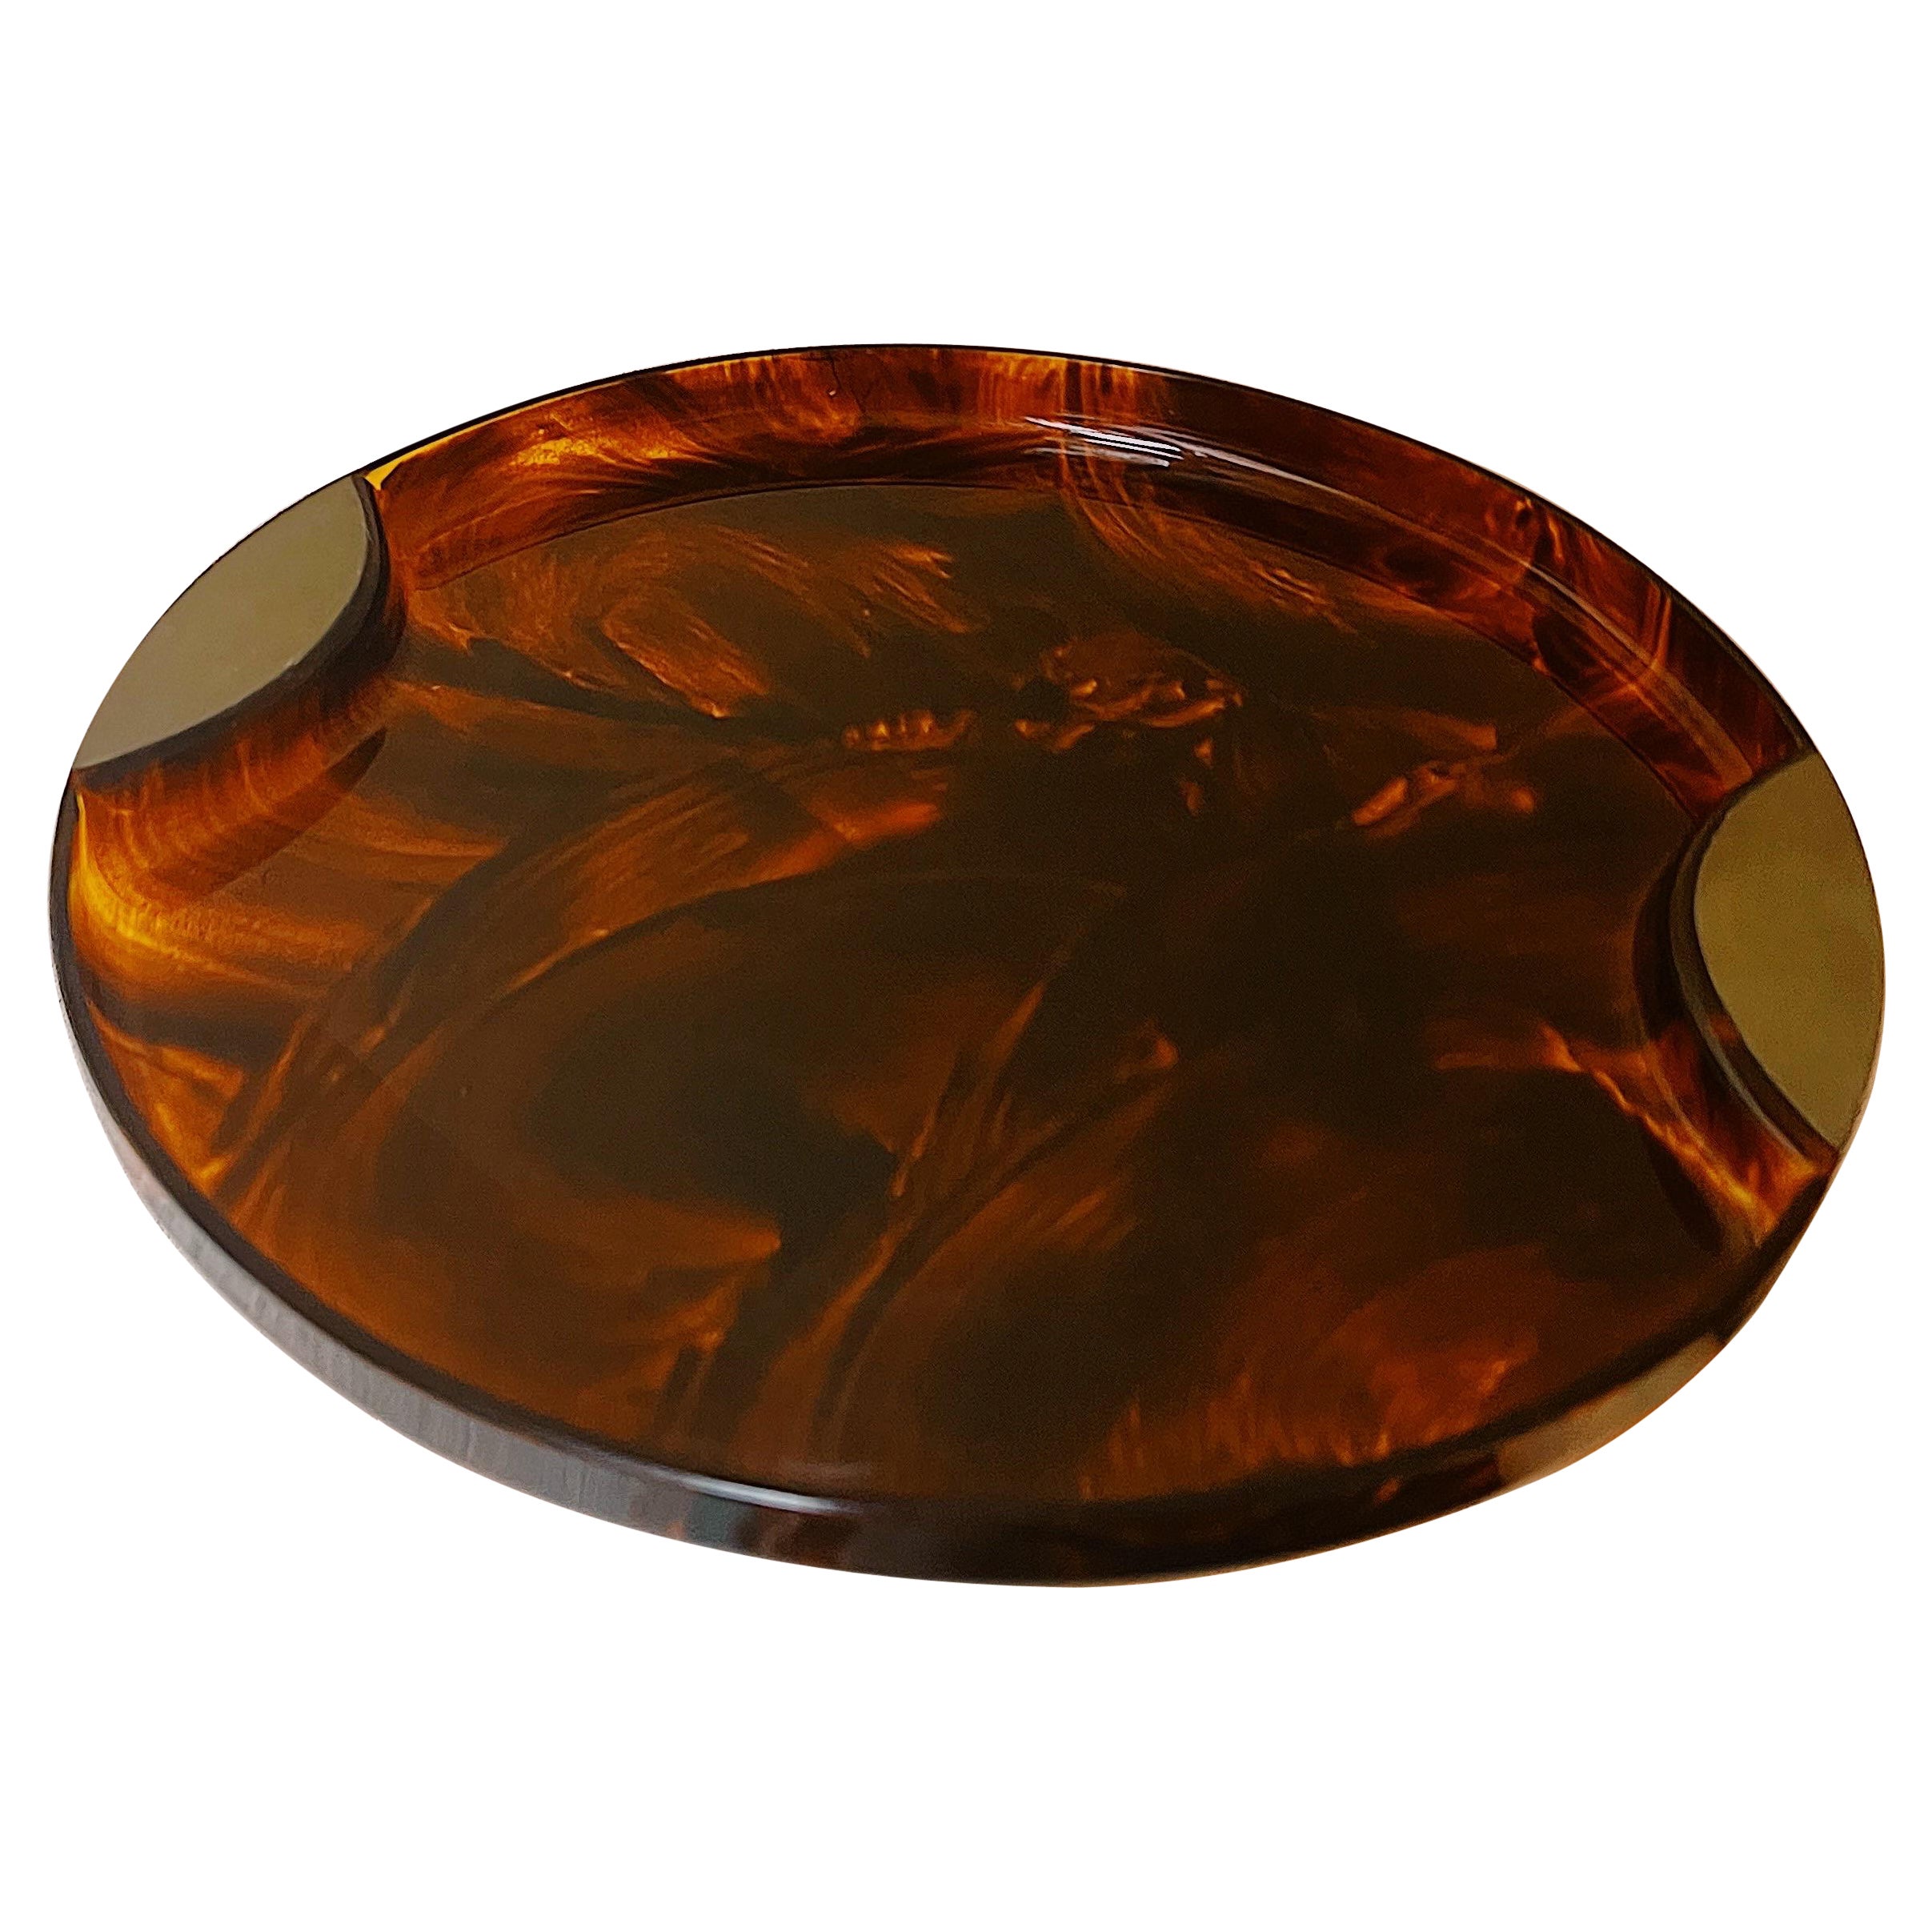 20th Century Vintage Dior Faux Tortoiseshell Lucite Serving Tray